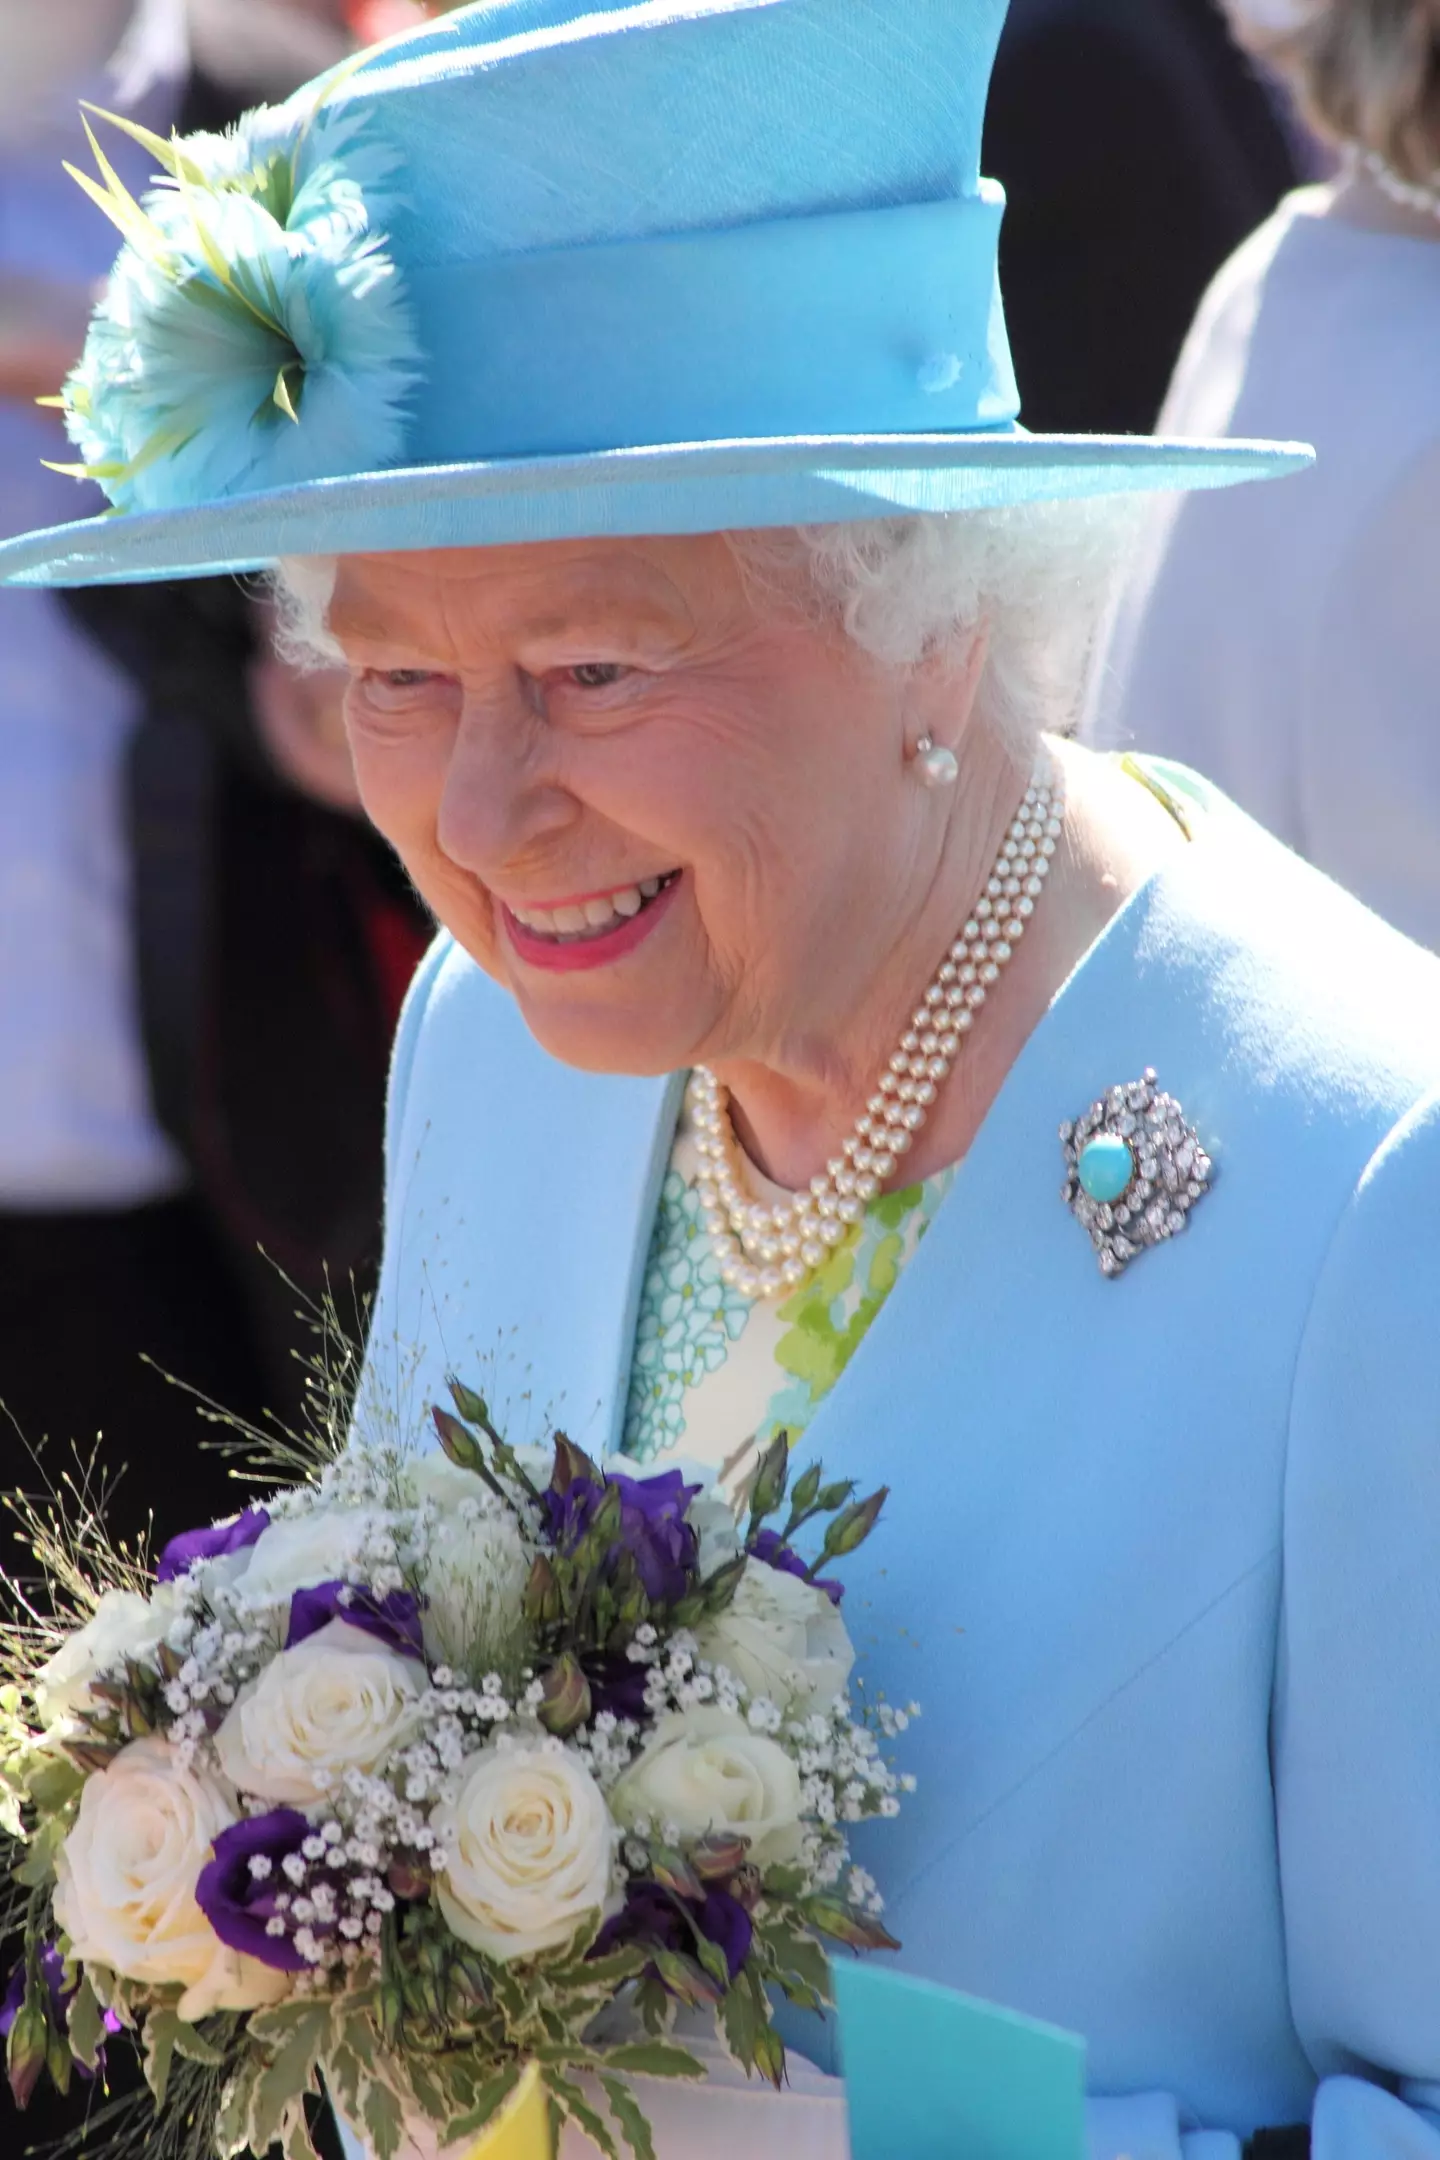 The Queen's funeral will take place at Westminster Abbey on Monday 19 September at 11am.